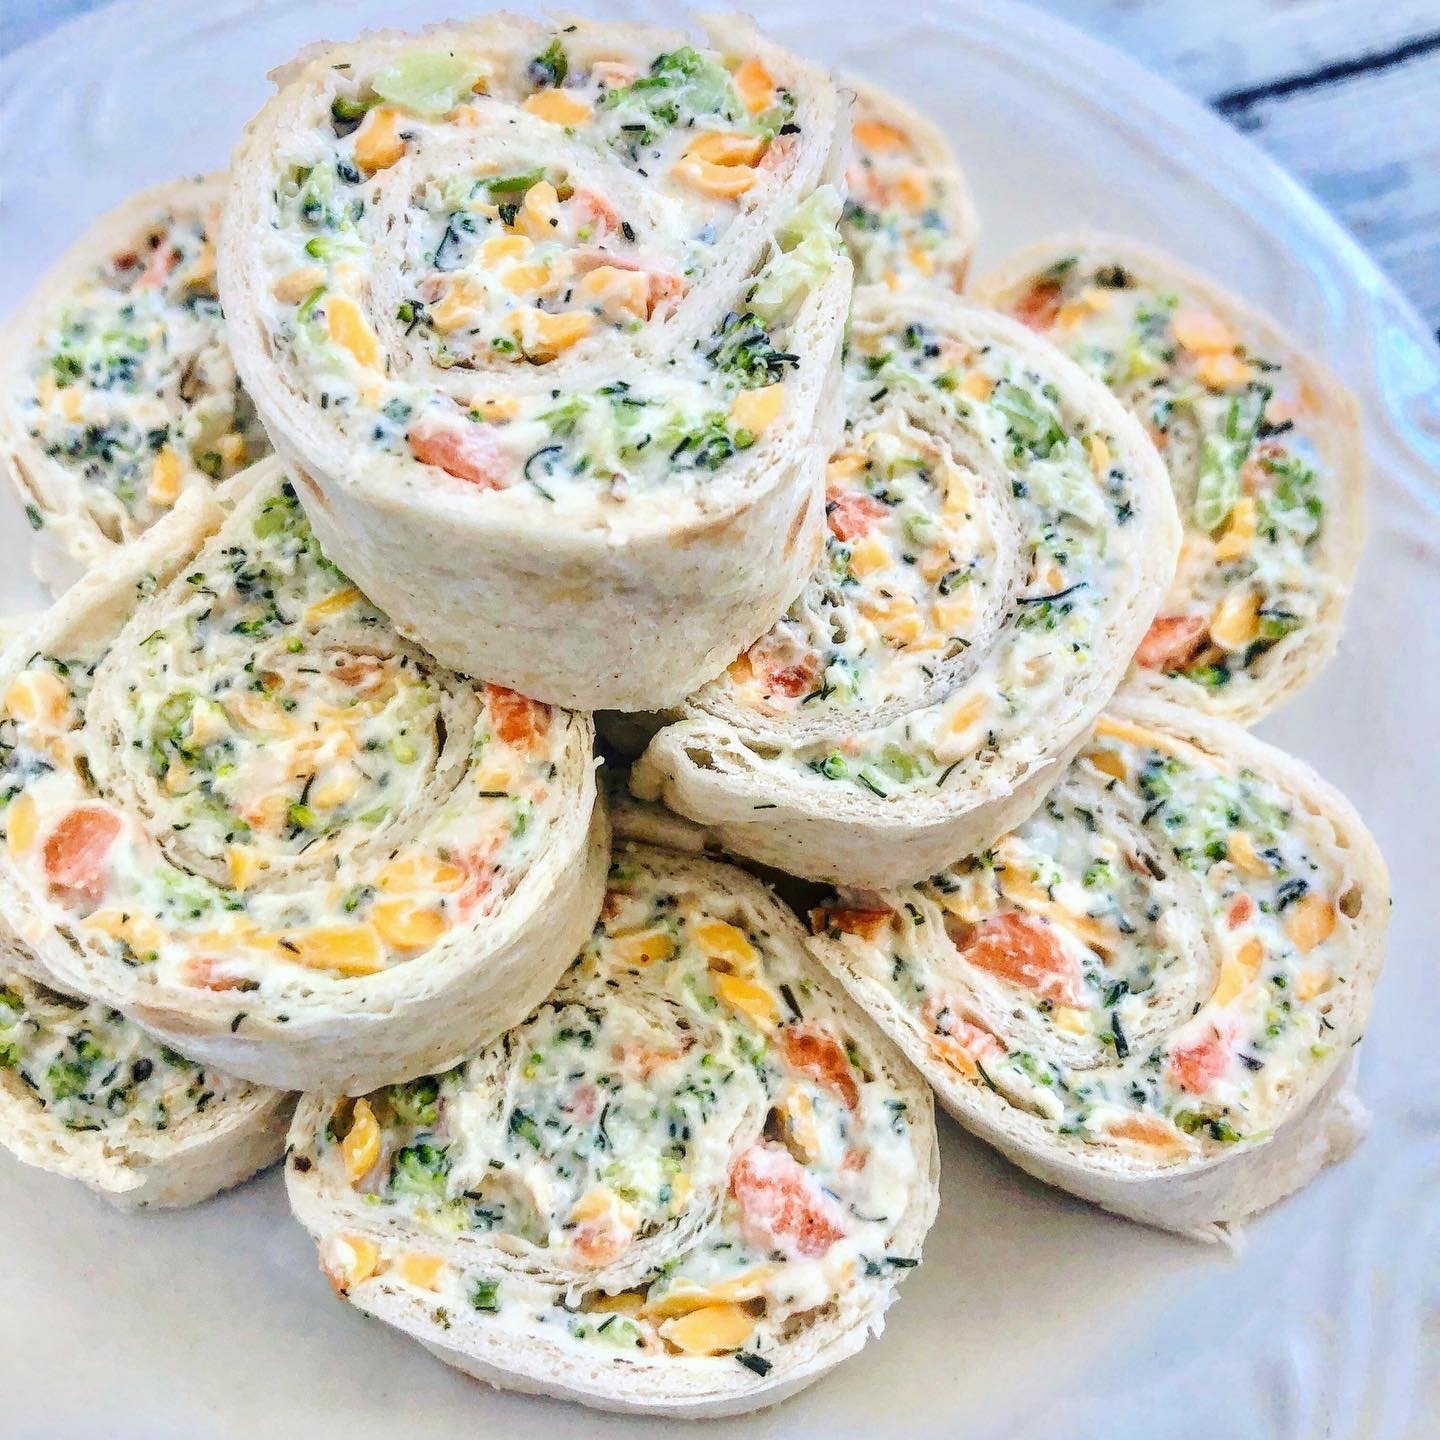 Vegan Veggie Pinwheels - Broccoli and carrots with all-vegan cream cheese, mayonnaise, cheddar cheese, herbs & spices for an easy, crowd-pleasing appetizer! via @thiswifecooks